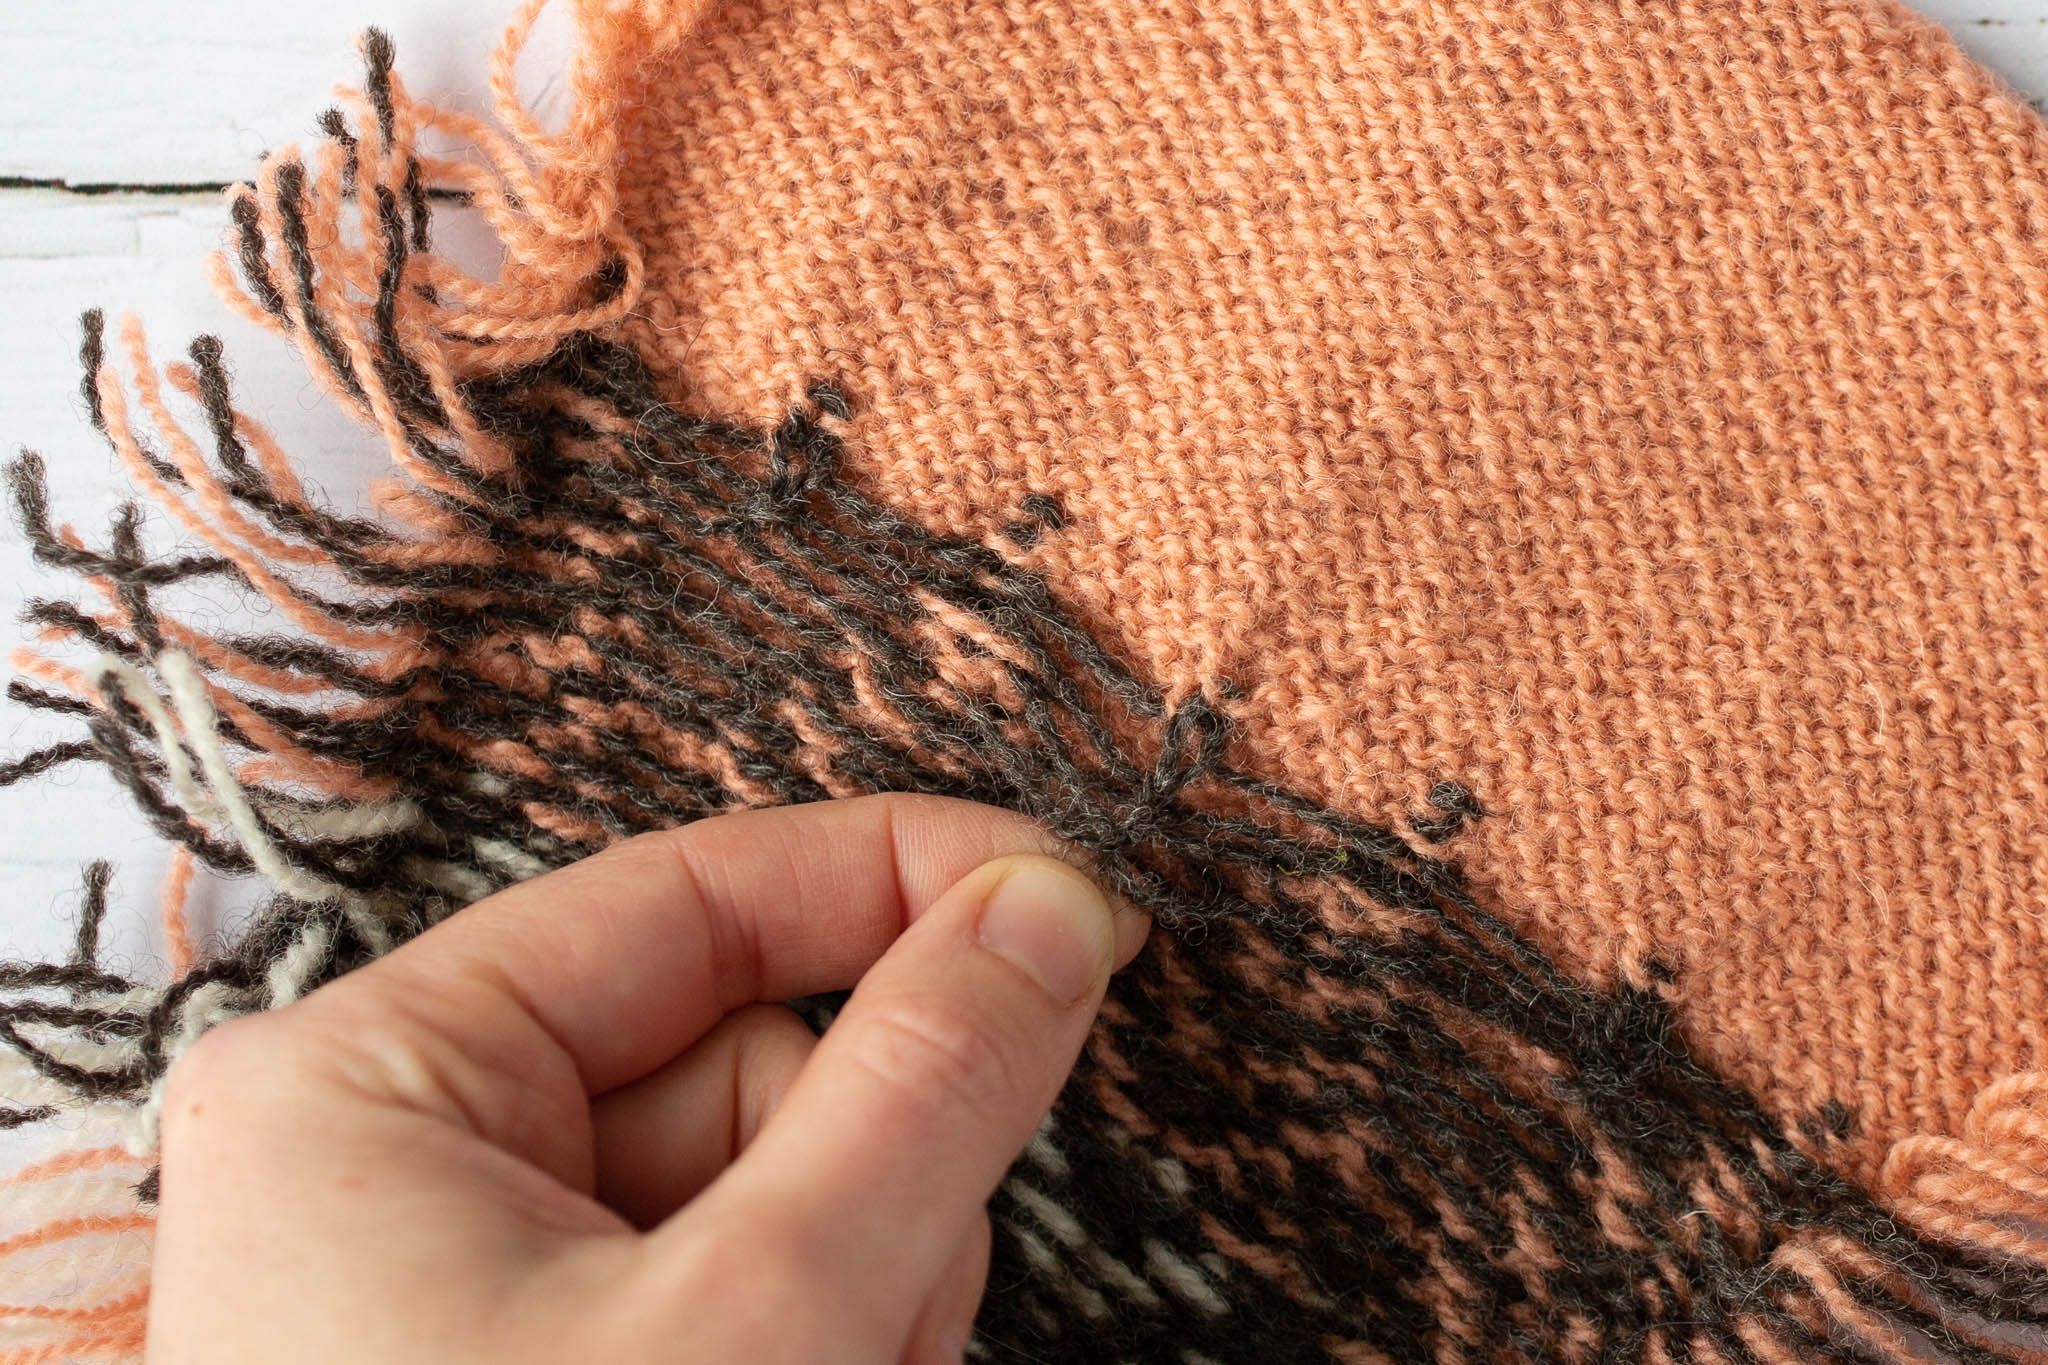 The reverse side of a coral and brown coloured piece of knitting, a hand holds one of the brown strands on the knitted fabric